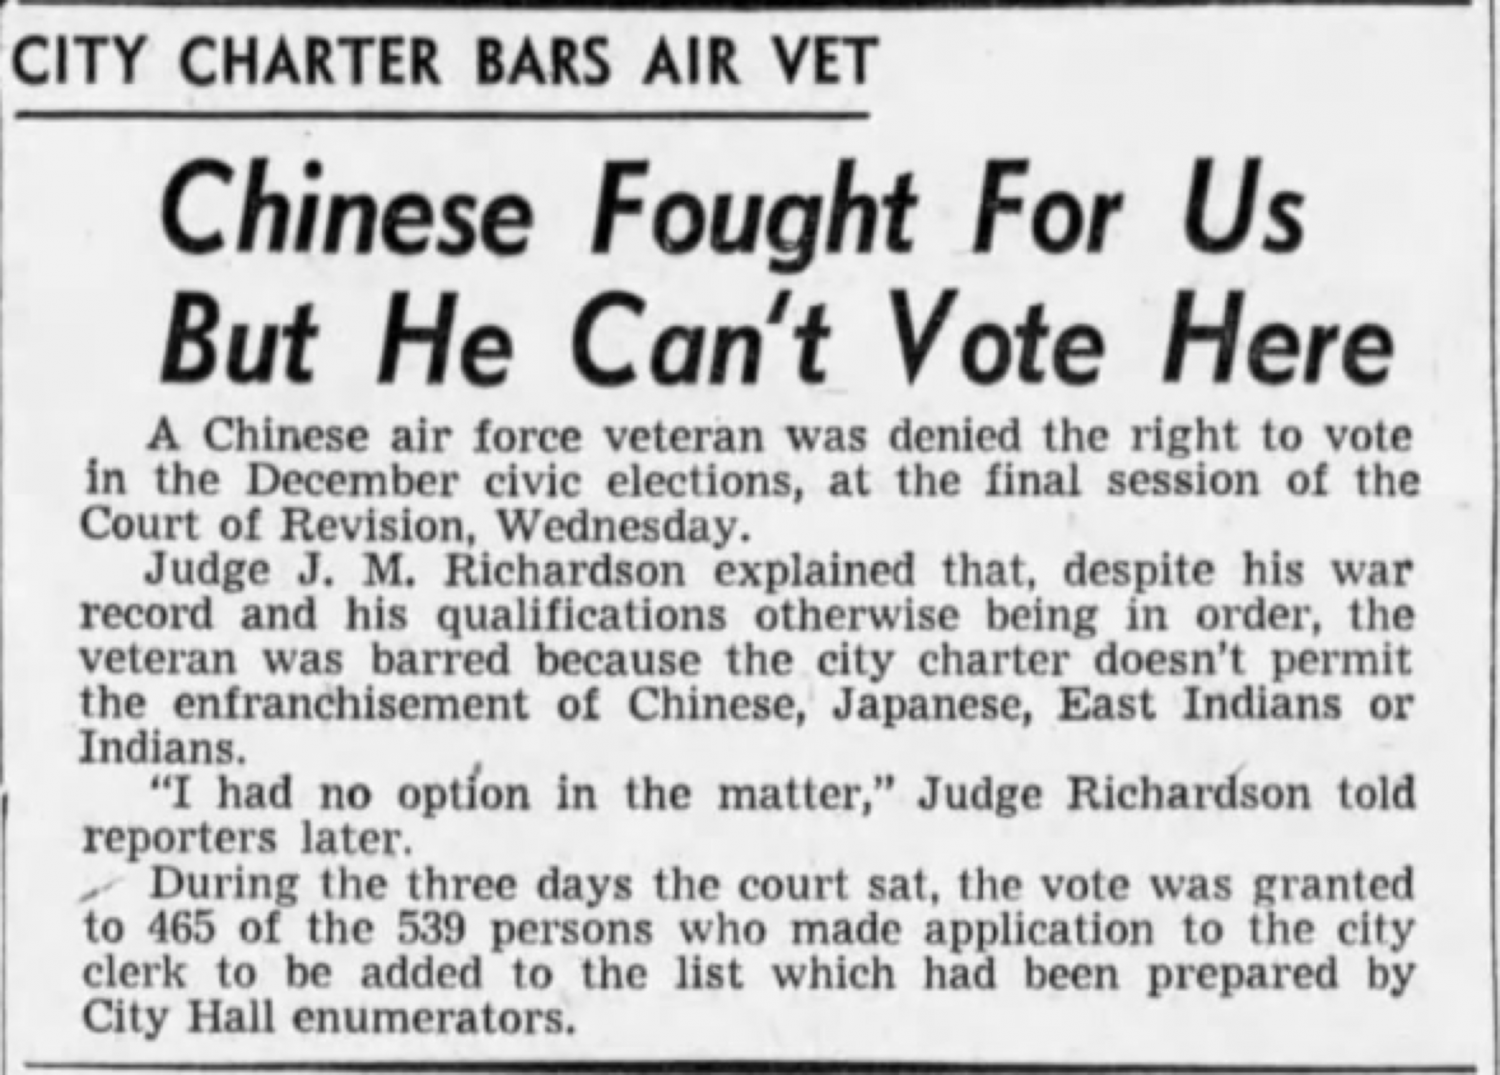 Newspaper article on Chinese WWII veteran in Vancouver denied the right to vote in 1946.